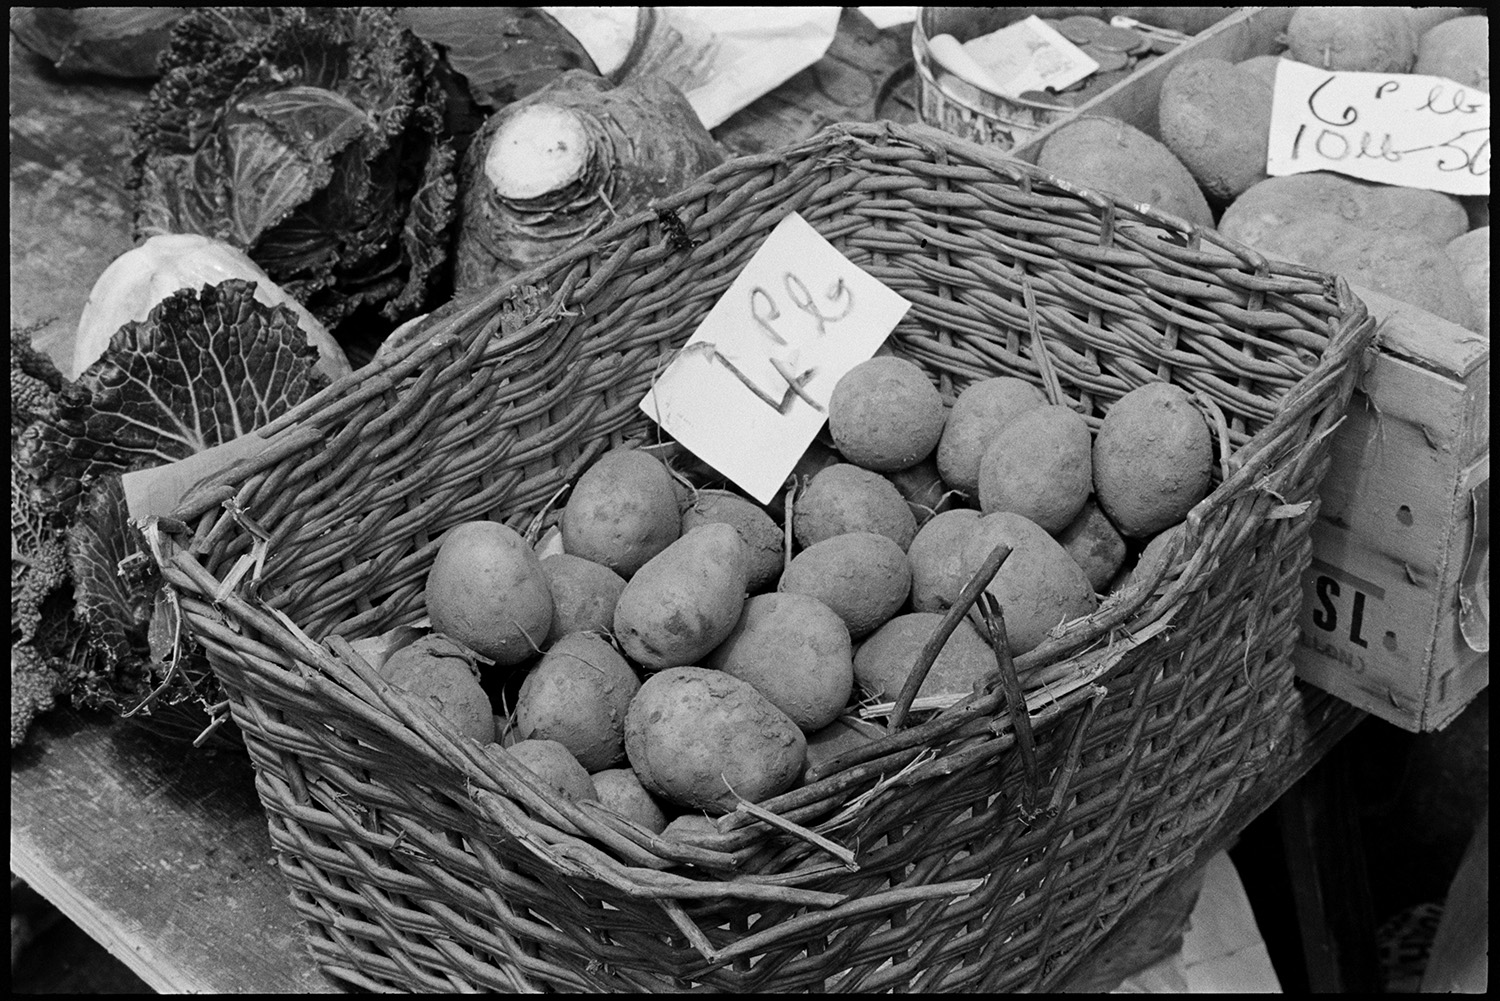 Pannier market, vegetables in baskets, potatoes, swedes, leeks.
[A basket of potatoes, a tray of potatoes, cabbages, a swede, price tickets and a tin with money in it on a vegetable stall at Barnstaple Pannier Market.]